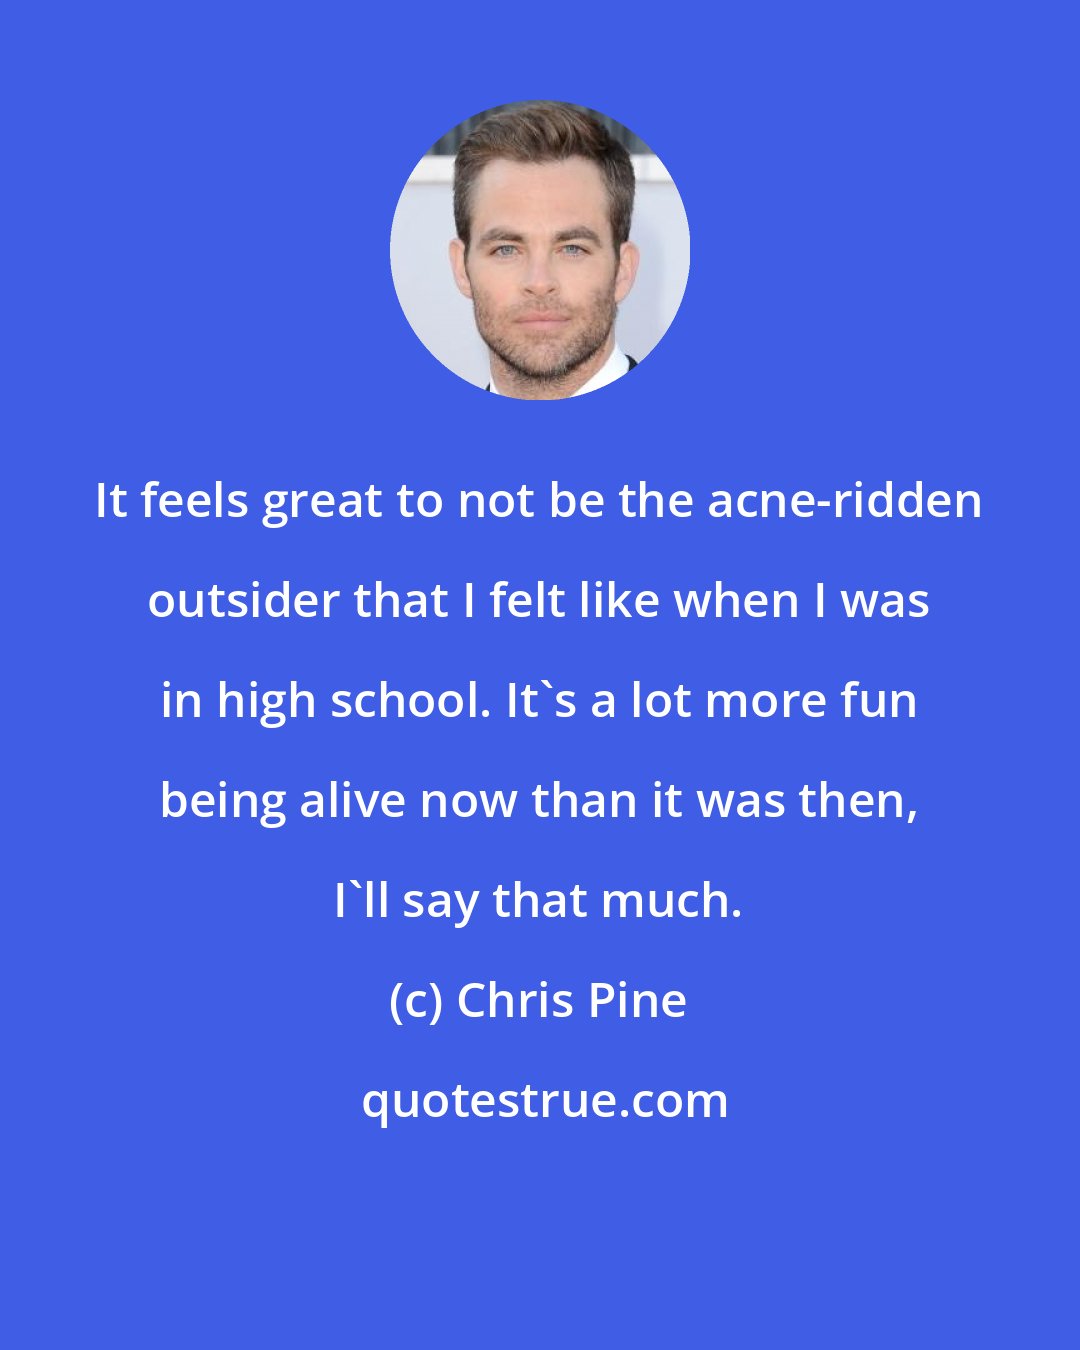 Chris Pine: It feels great to not be the acne-ridden outsider that I felt like when I was in high school. It's a lot more fun being alive now than it was then, I'll say that much.